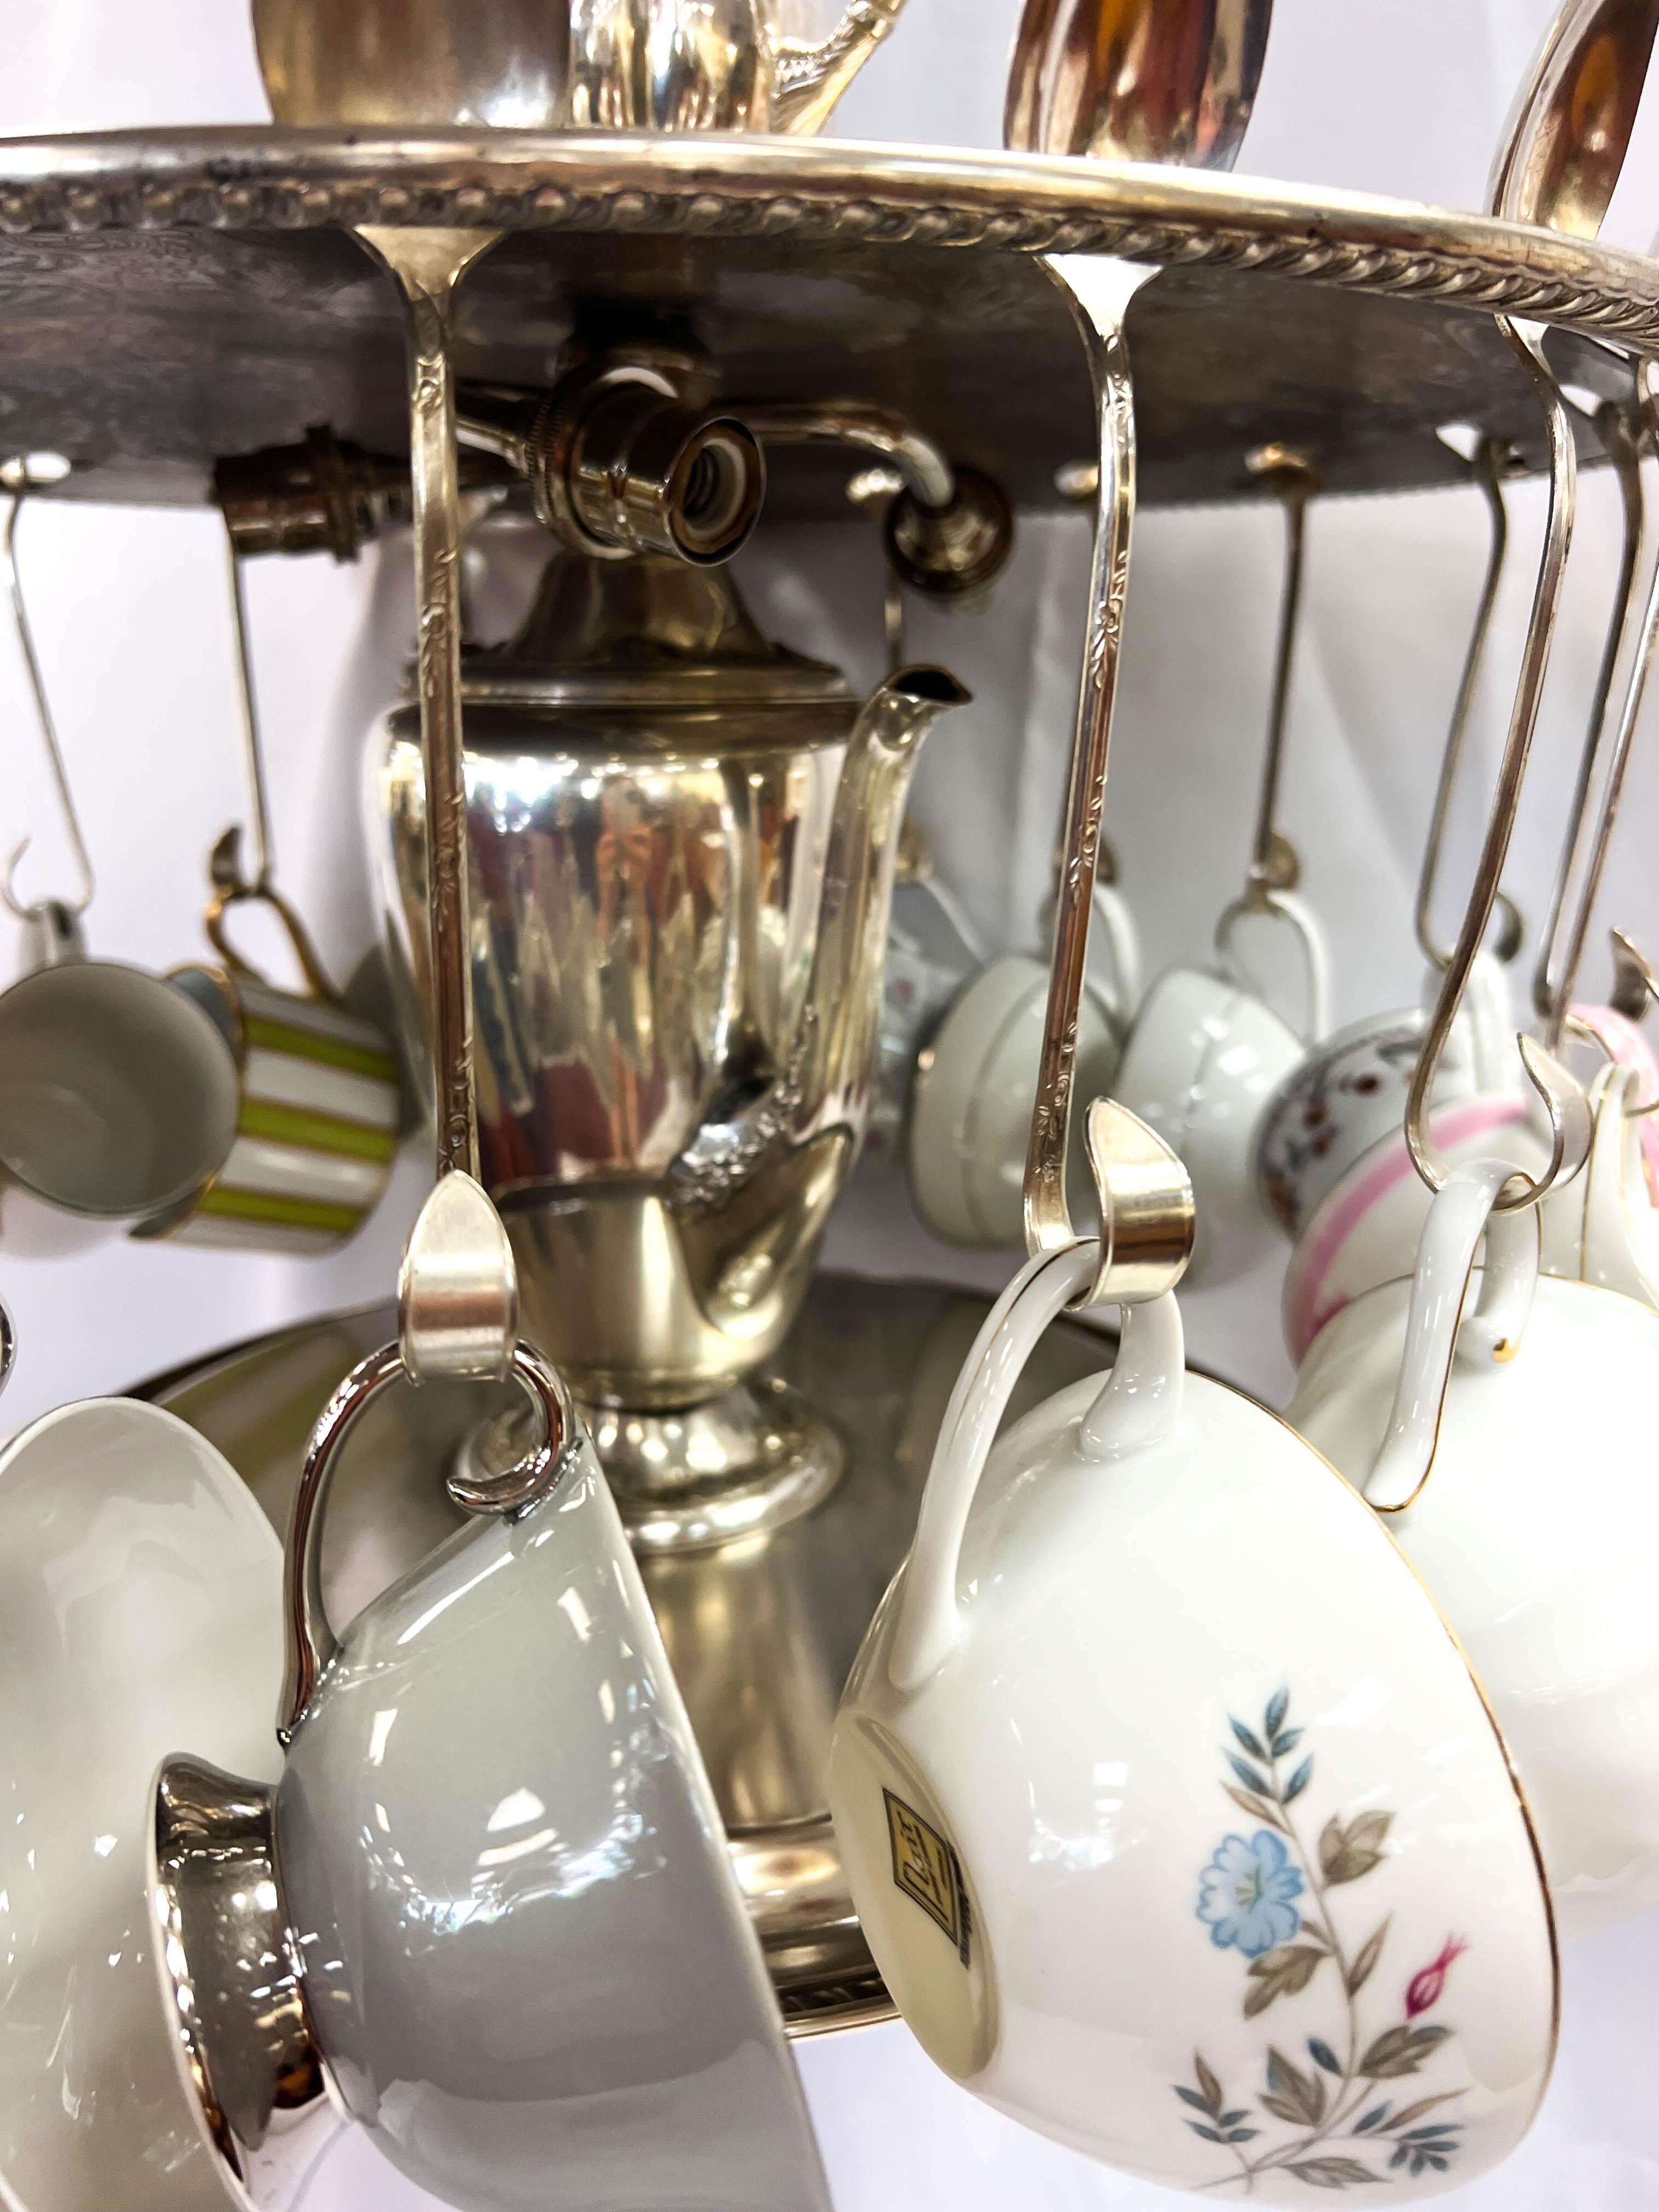 Hand-Crafted One-Of-A-Kind Handcrafted Teacup Chandelier